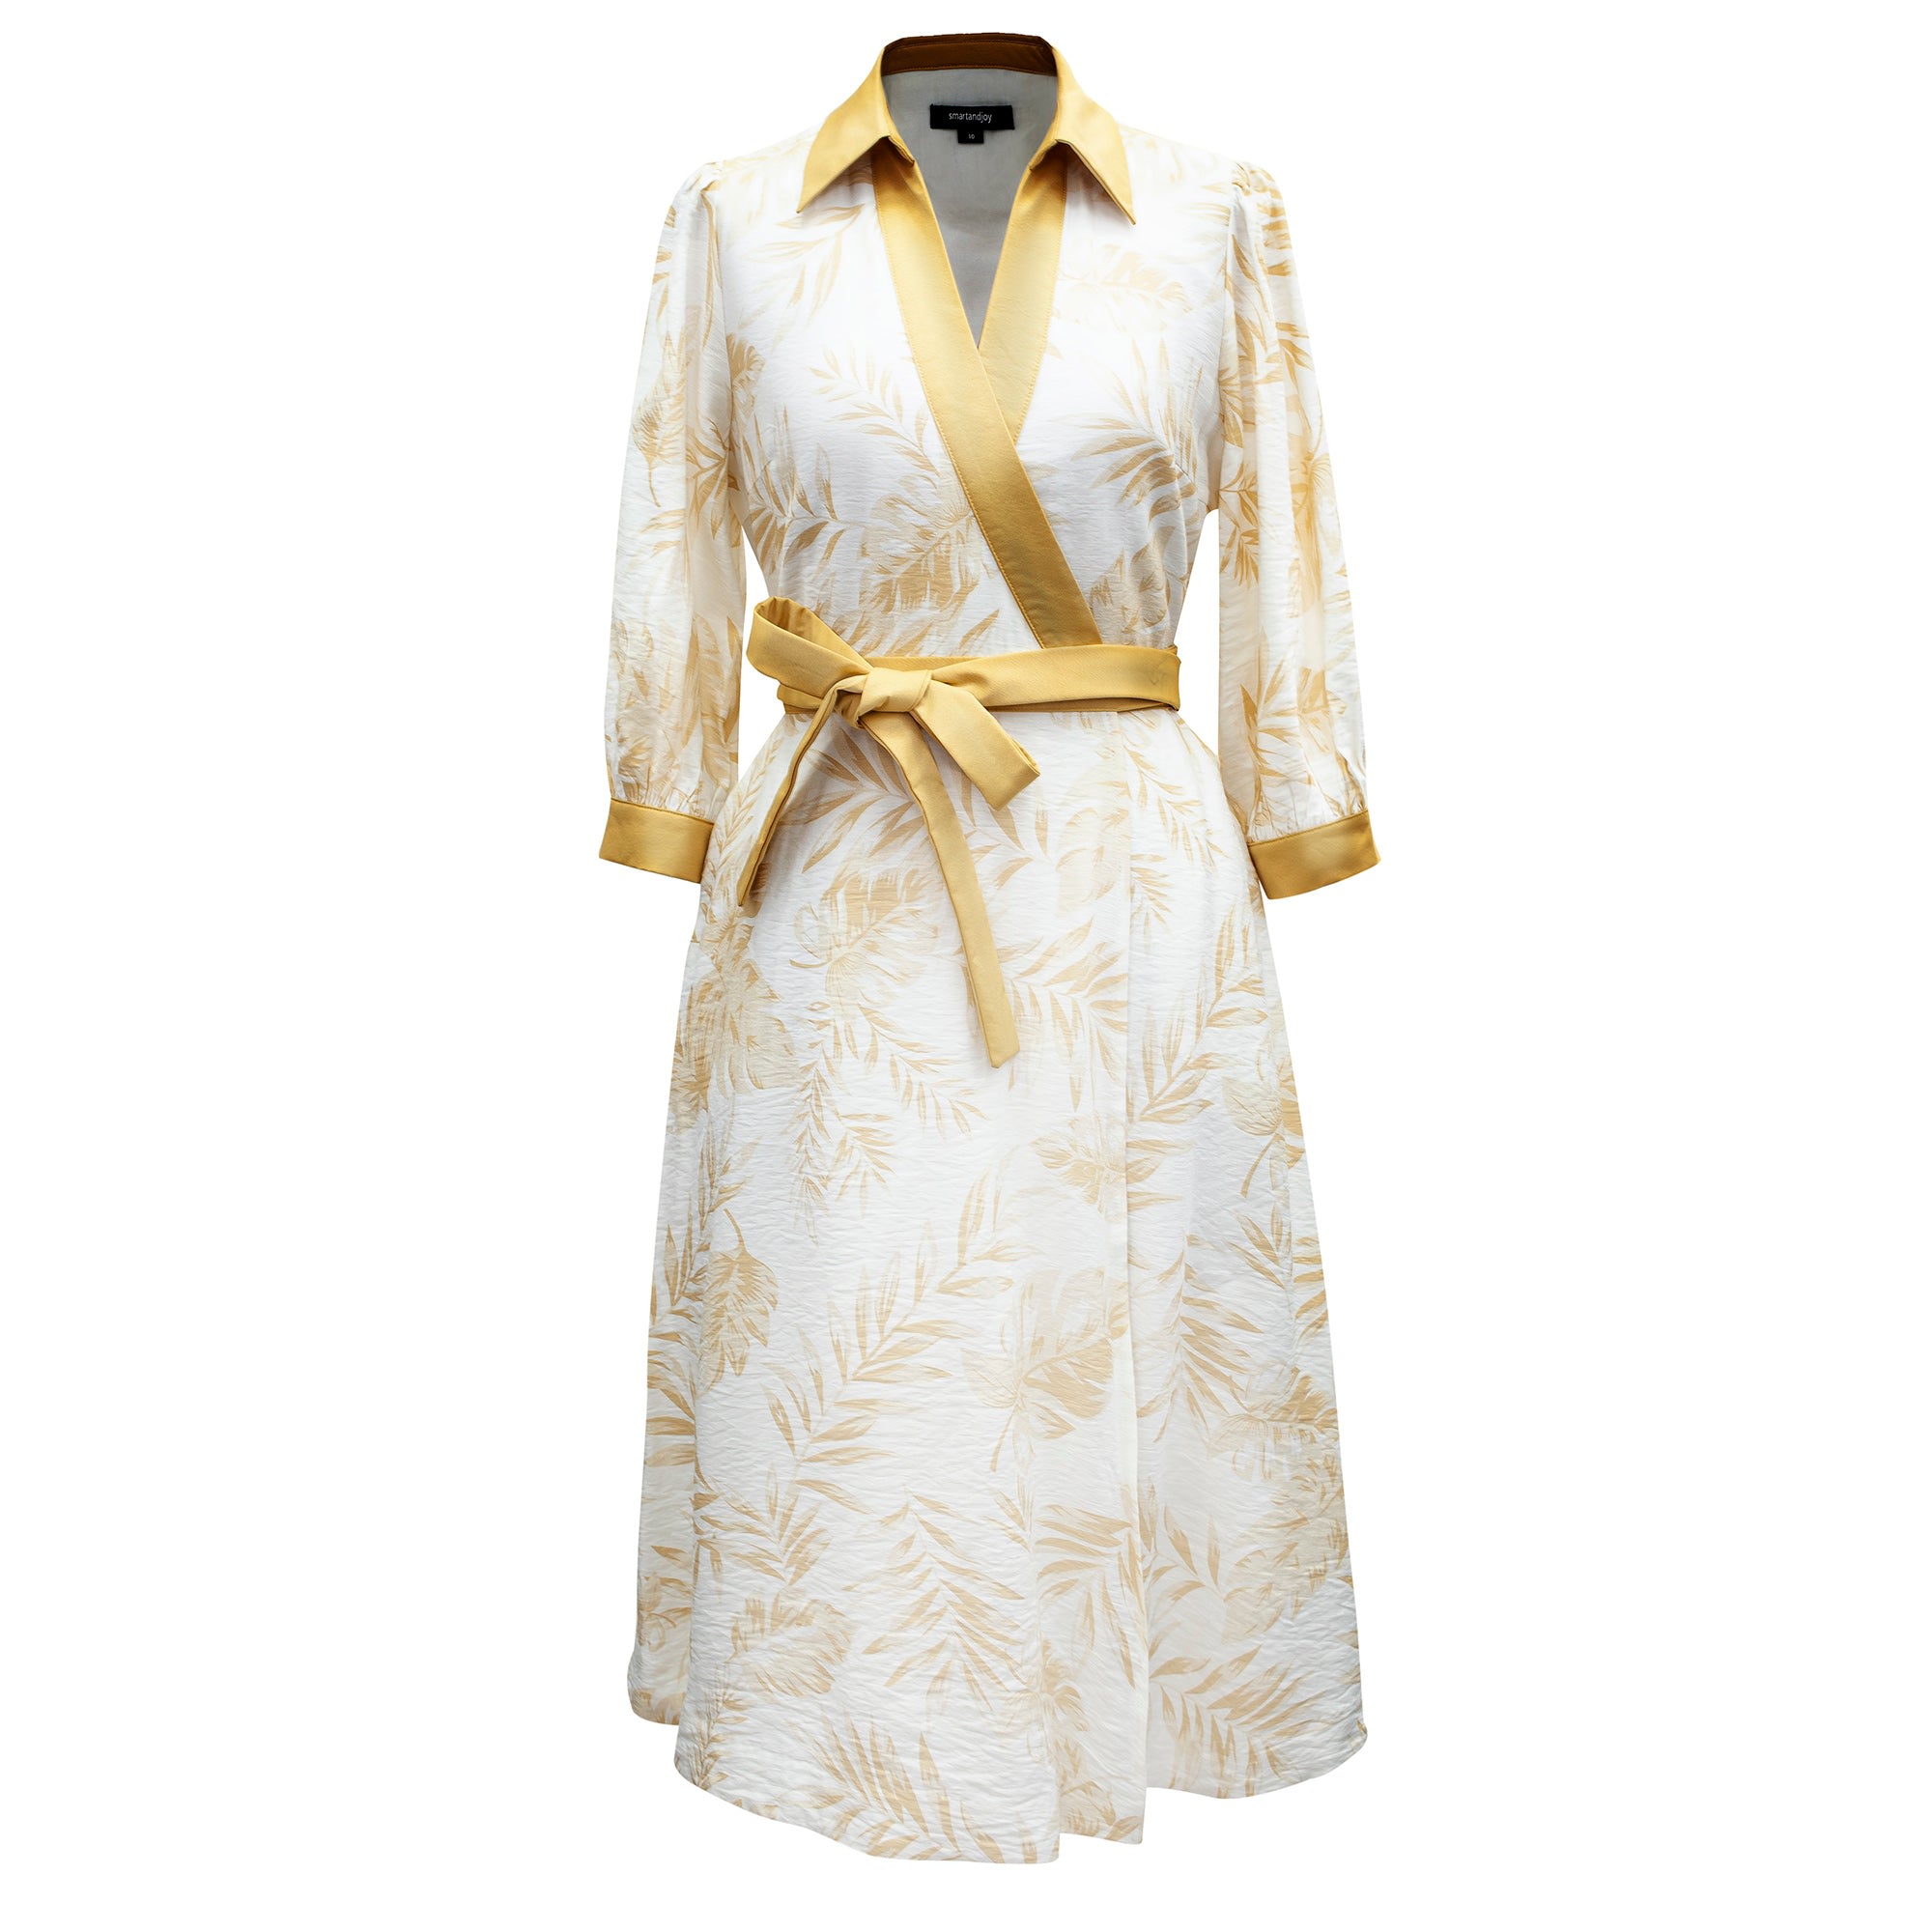 Women’s Bi-Material Wrap Dress With Tropical Print - Gold Extra Small Smart and Joy